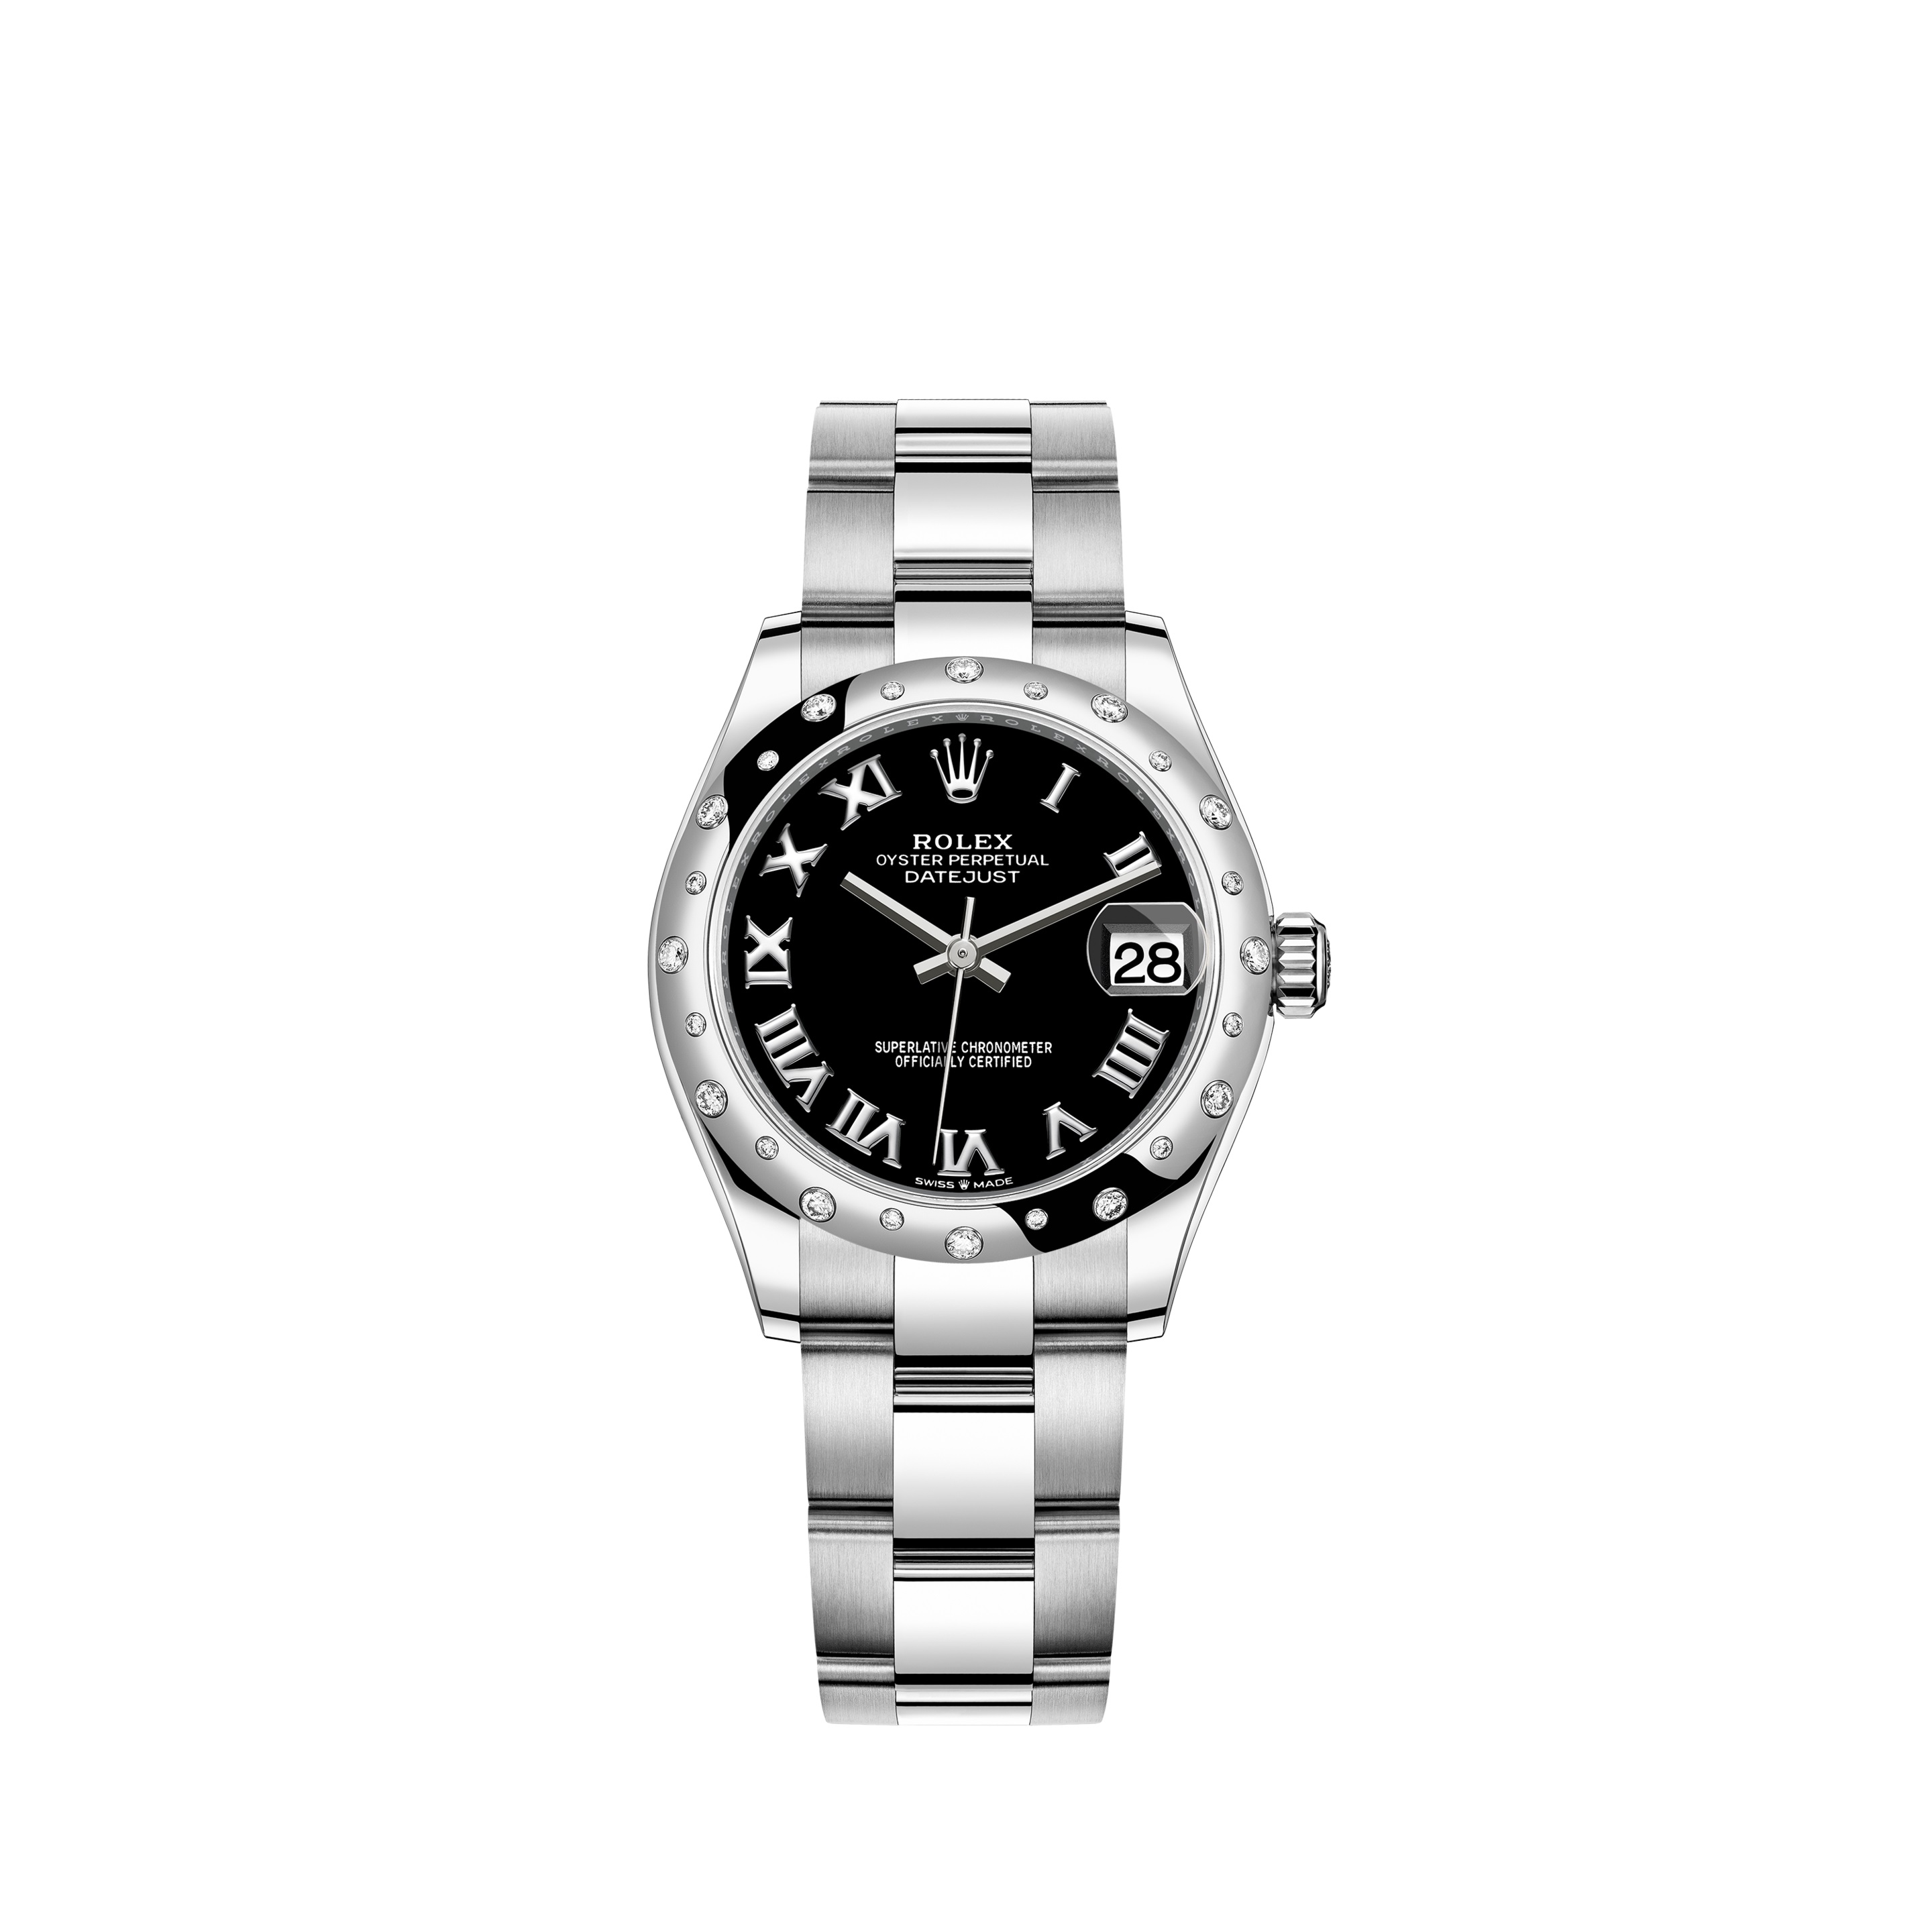 Datejust 31 278344RBR White Gold & Stainless Steel Watch (Bright Black) - Click Image to Close